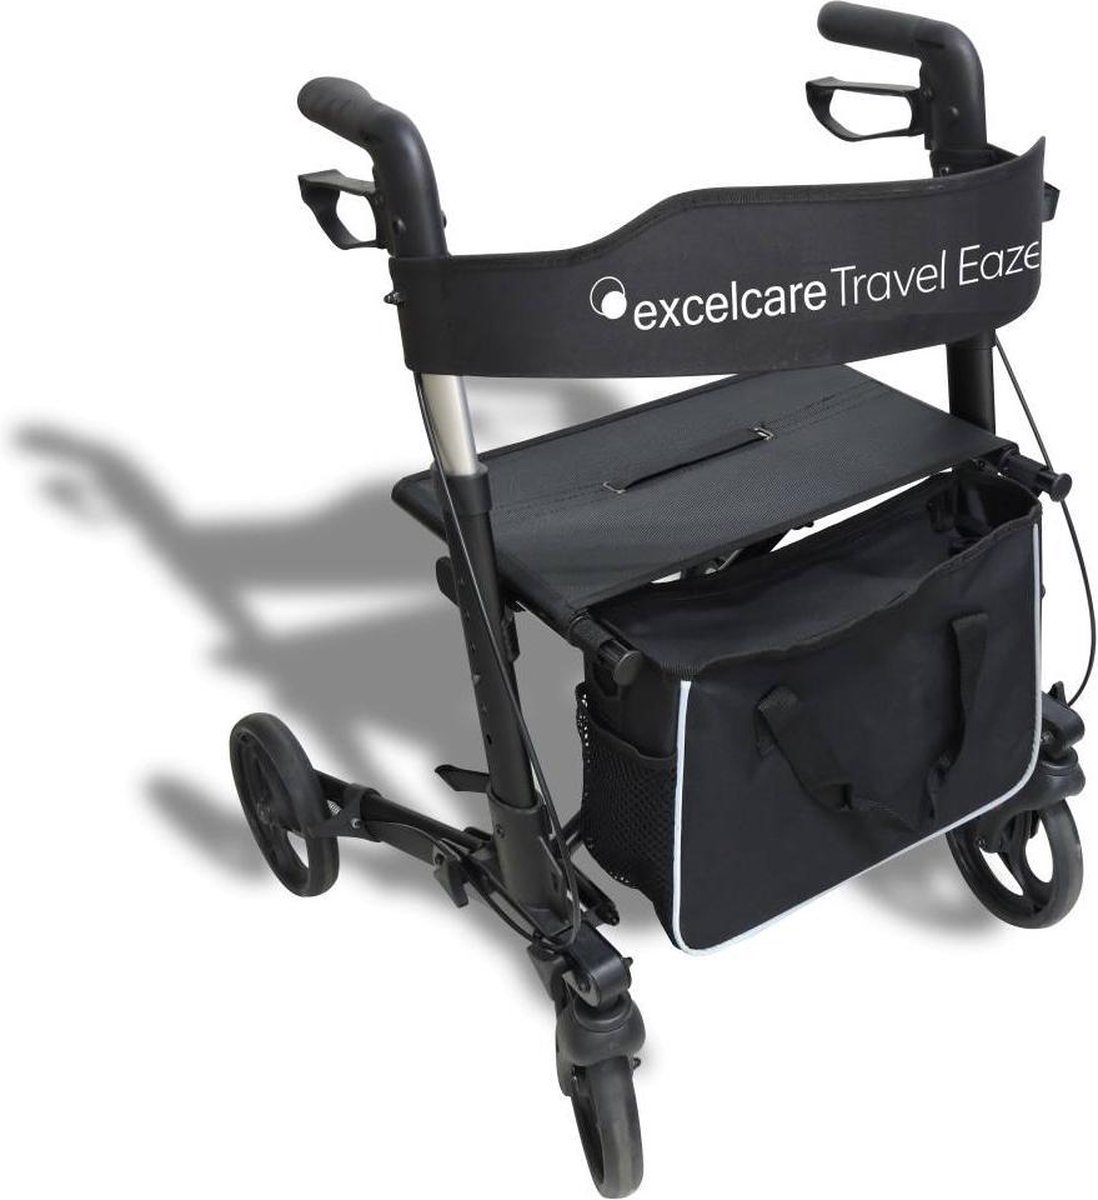 ExcelCare Travel Eaze 2 rollator - Coffee Brown